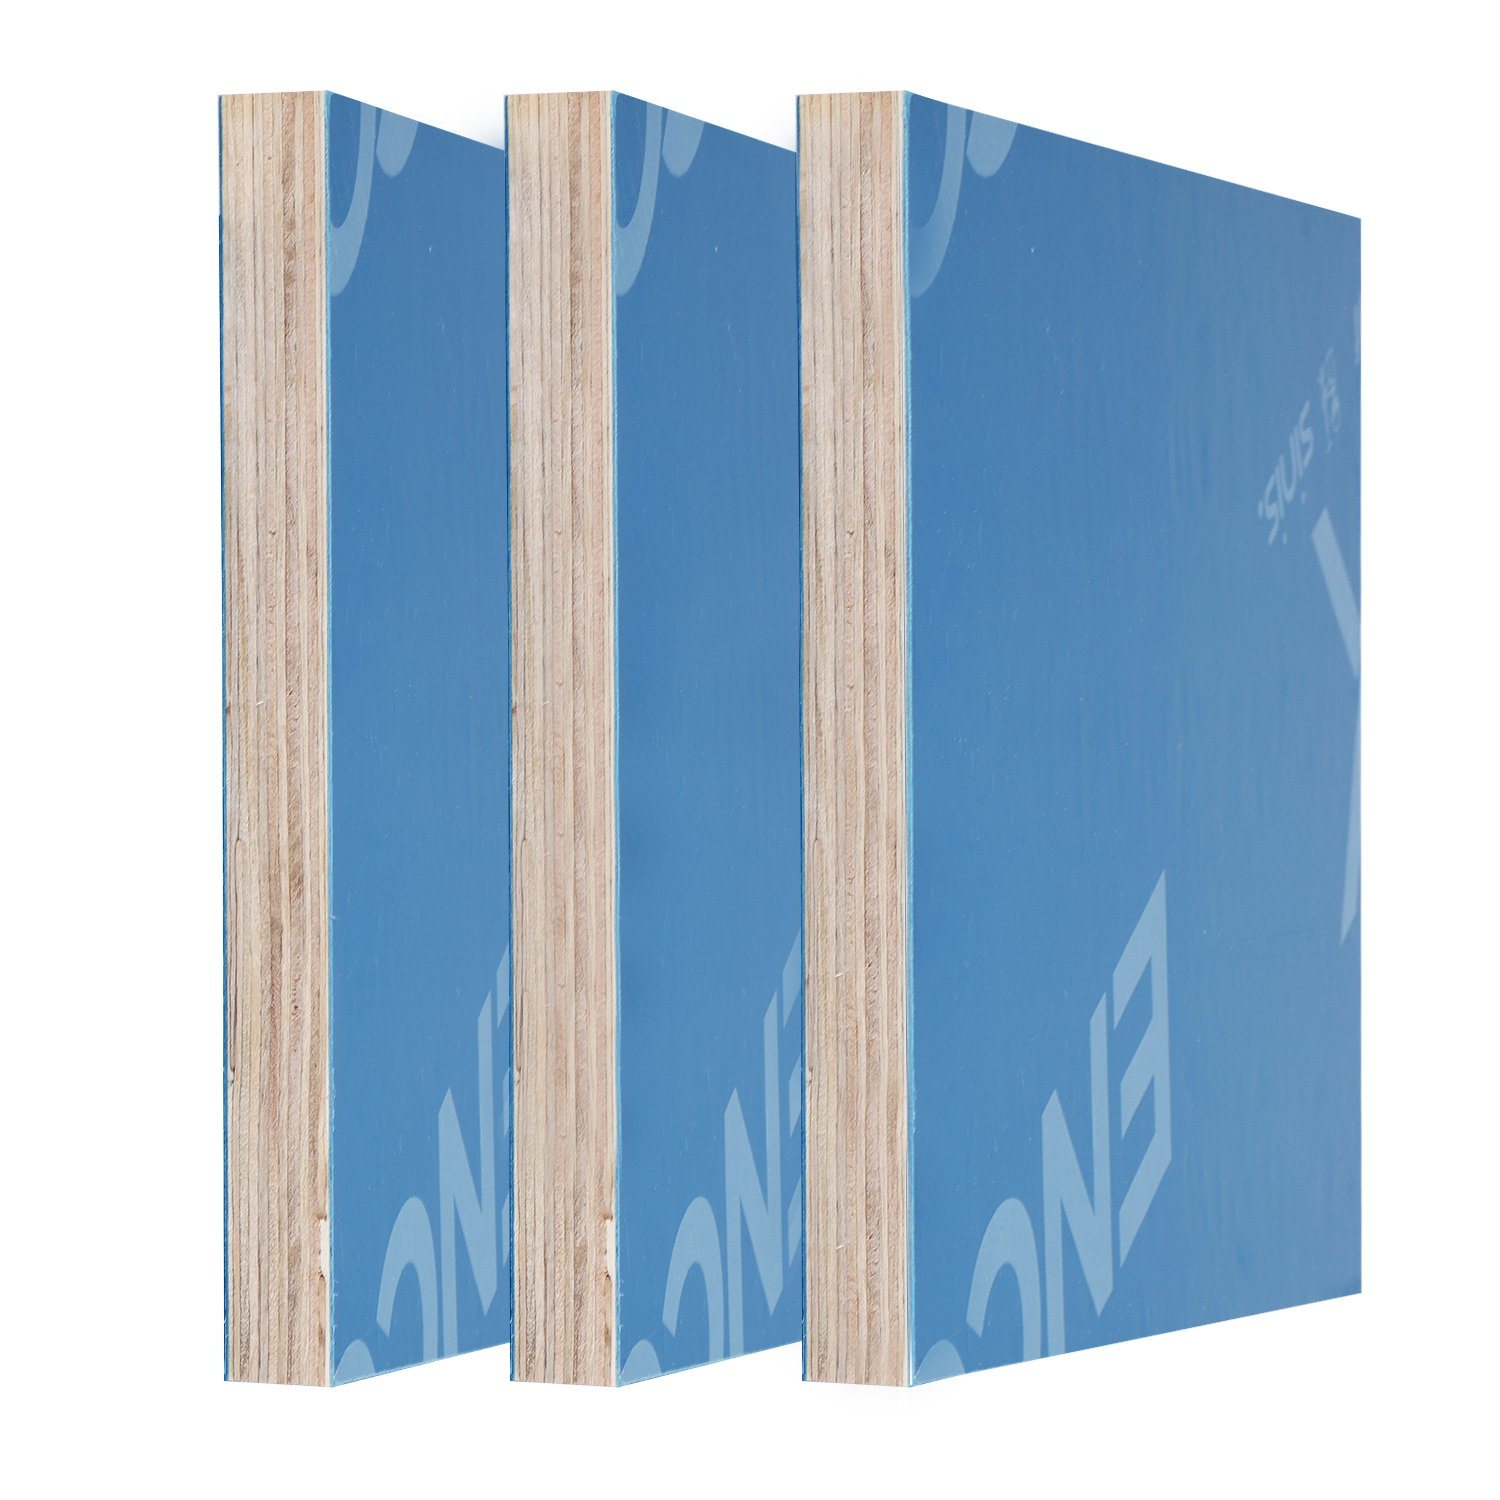 Blue Film Faced Concrete Plywood Board Formwork Shuttering Plywood